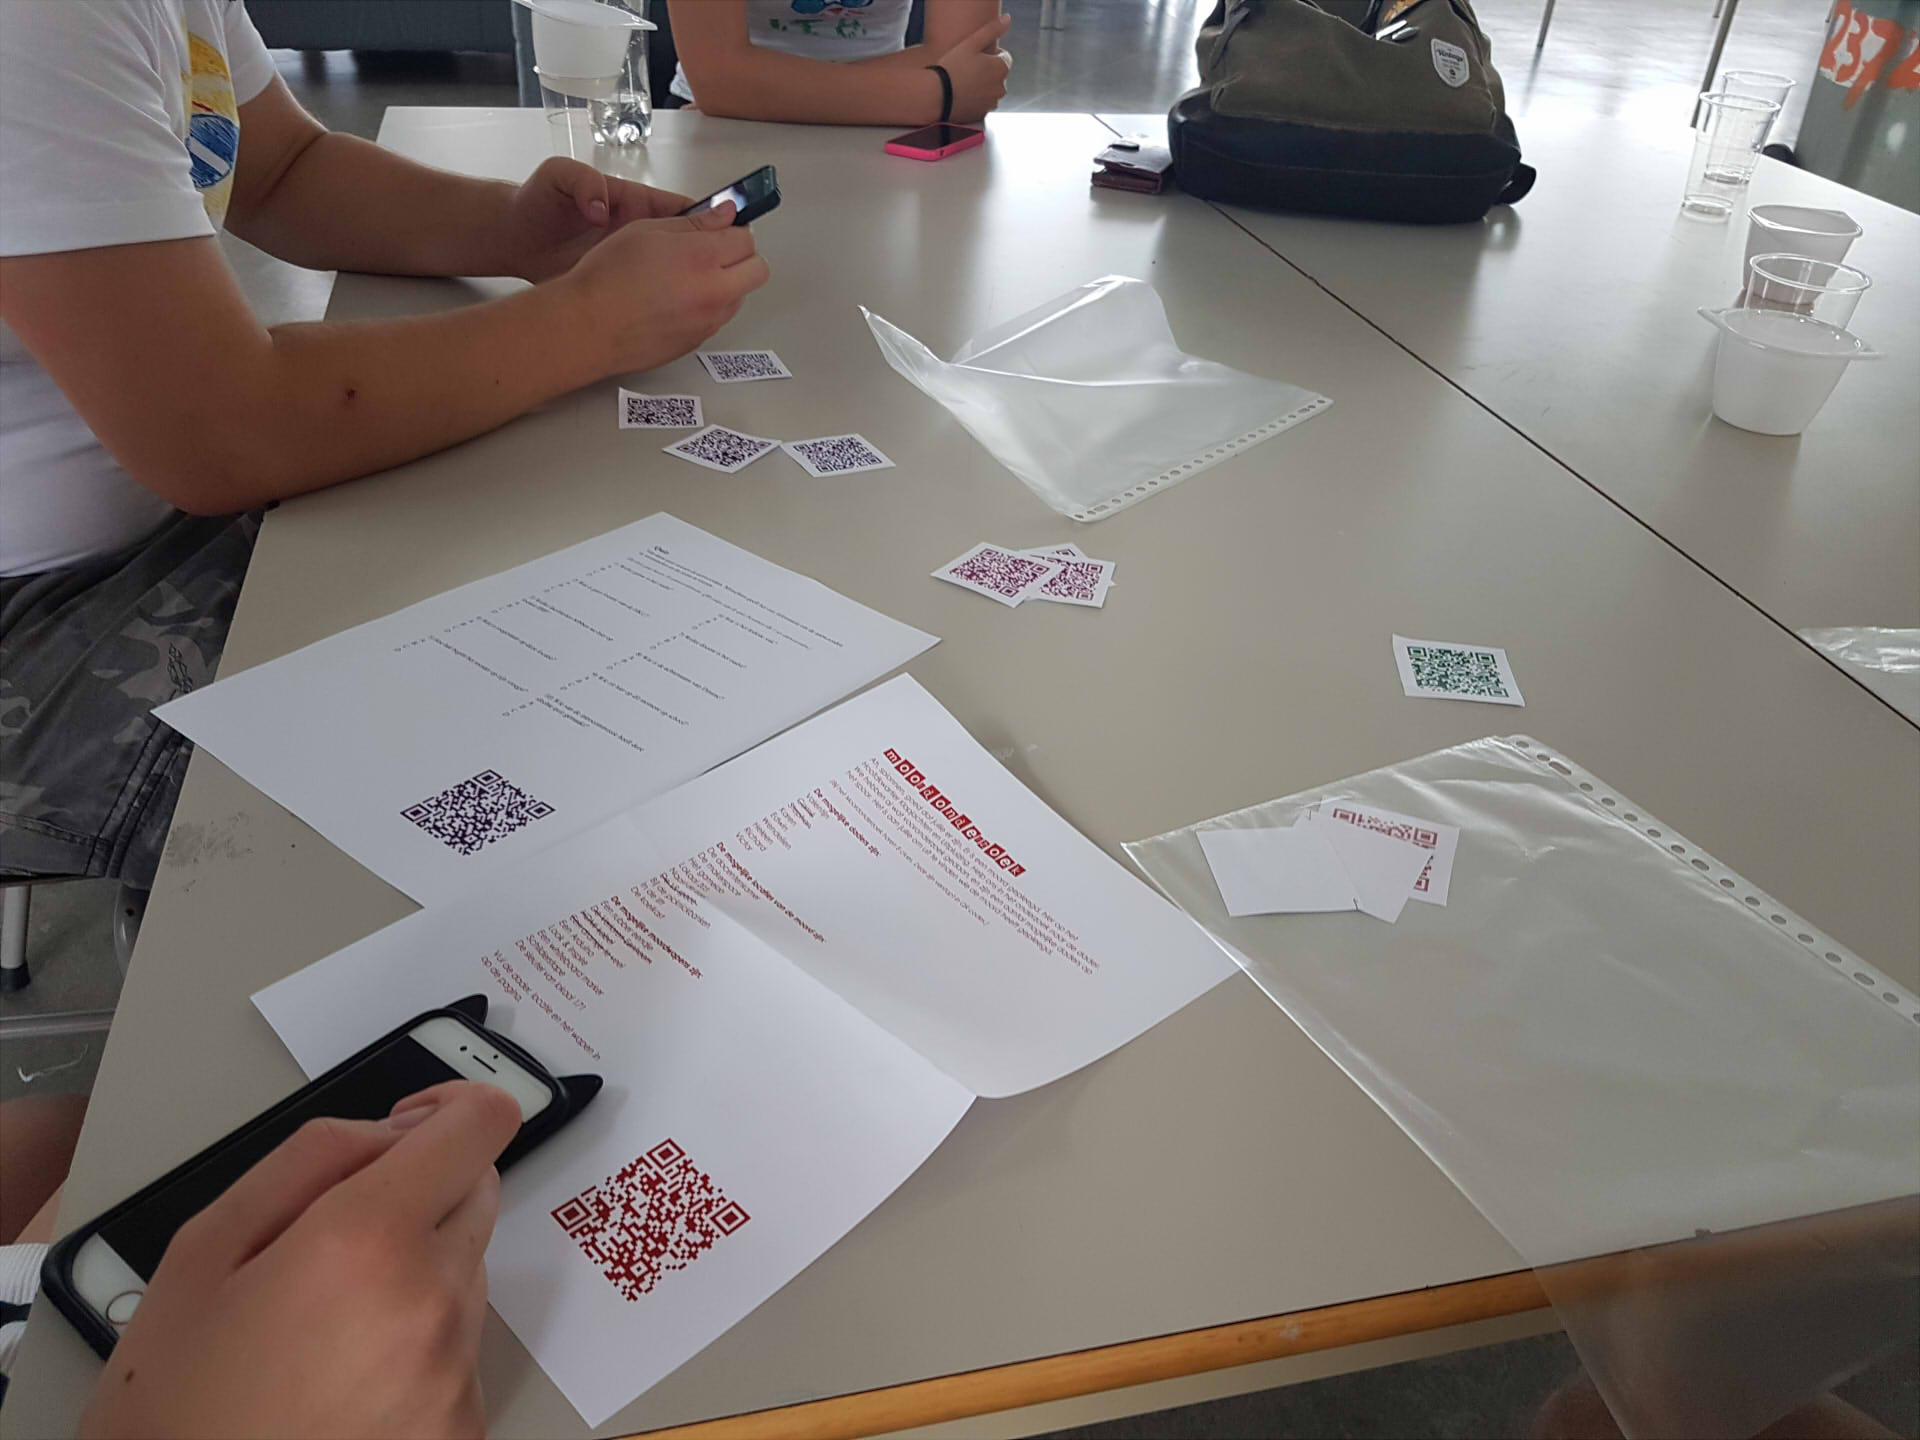 HKU Introduction Game (2019) by Josien Vos